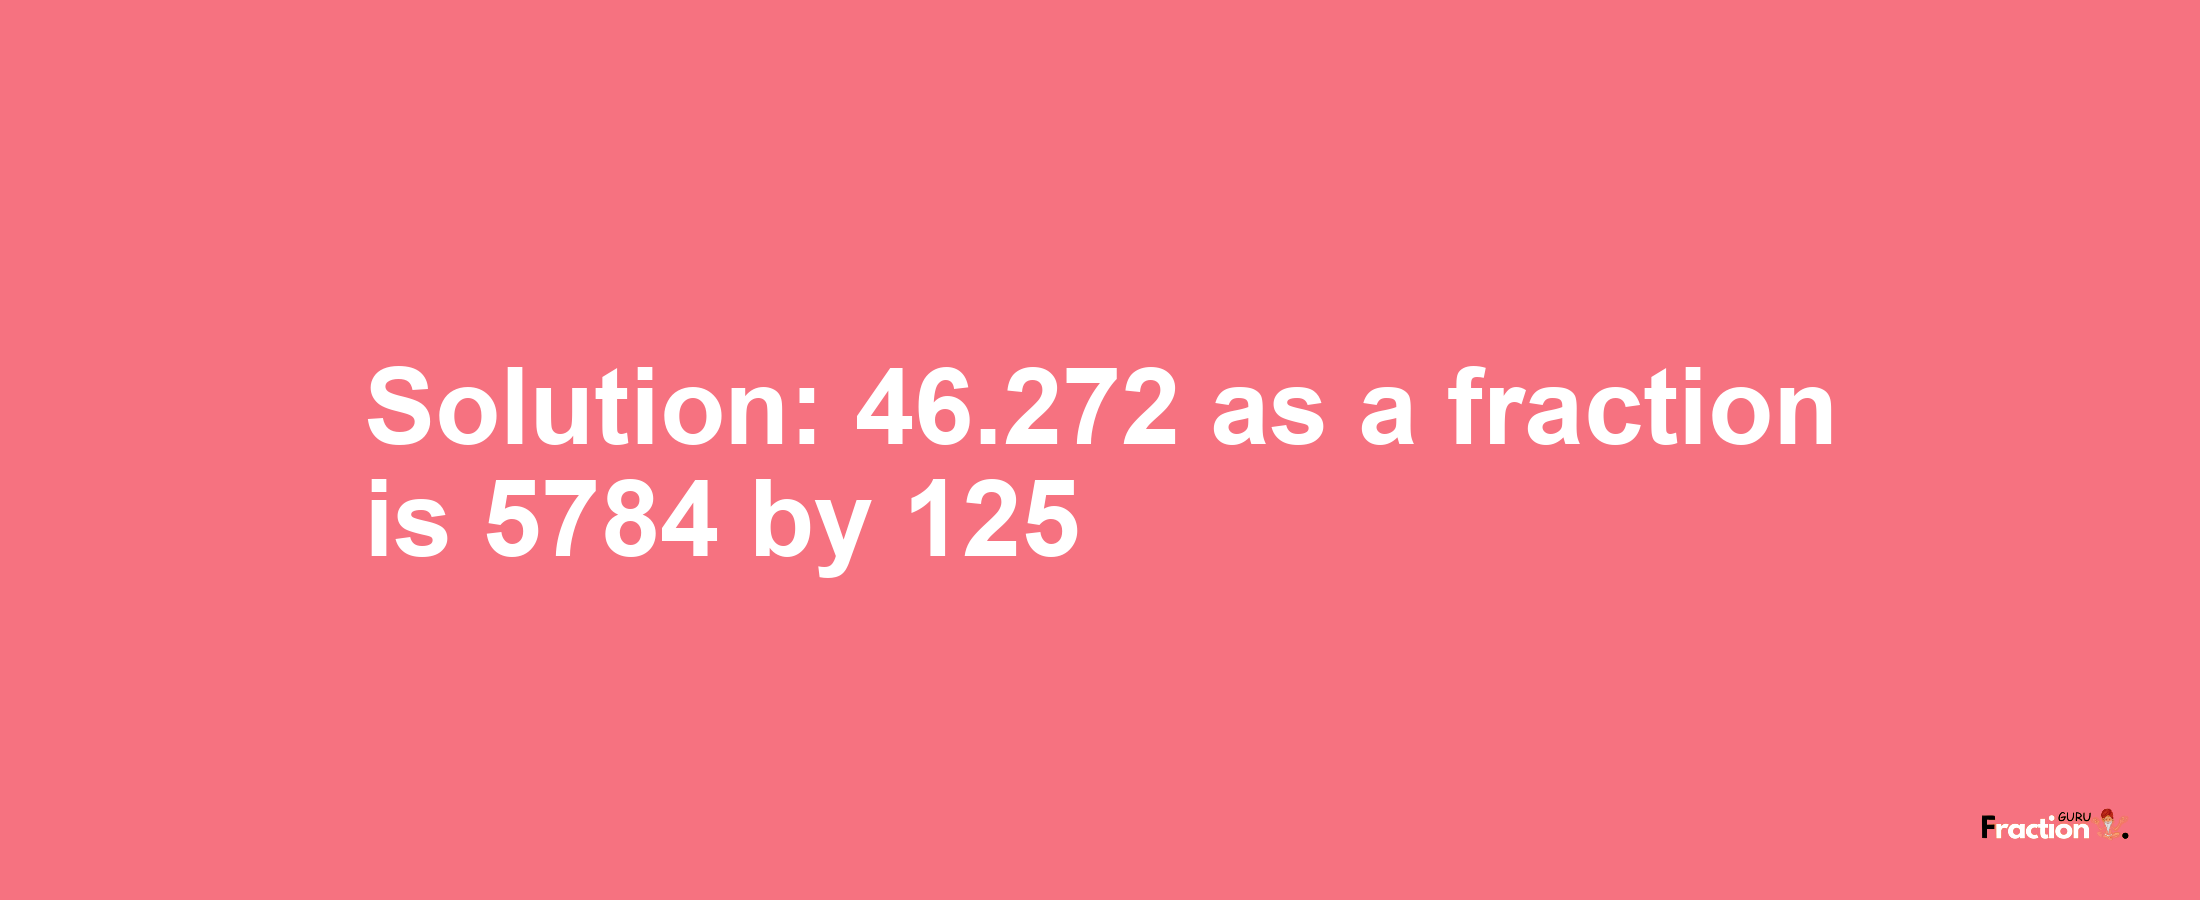 Solution:46.272 as a fraction is 5784/125